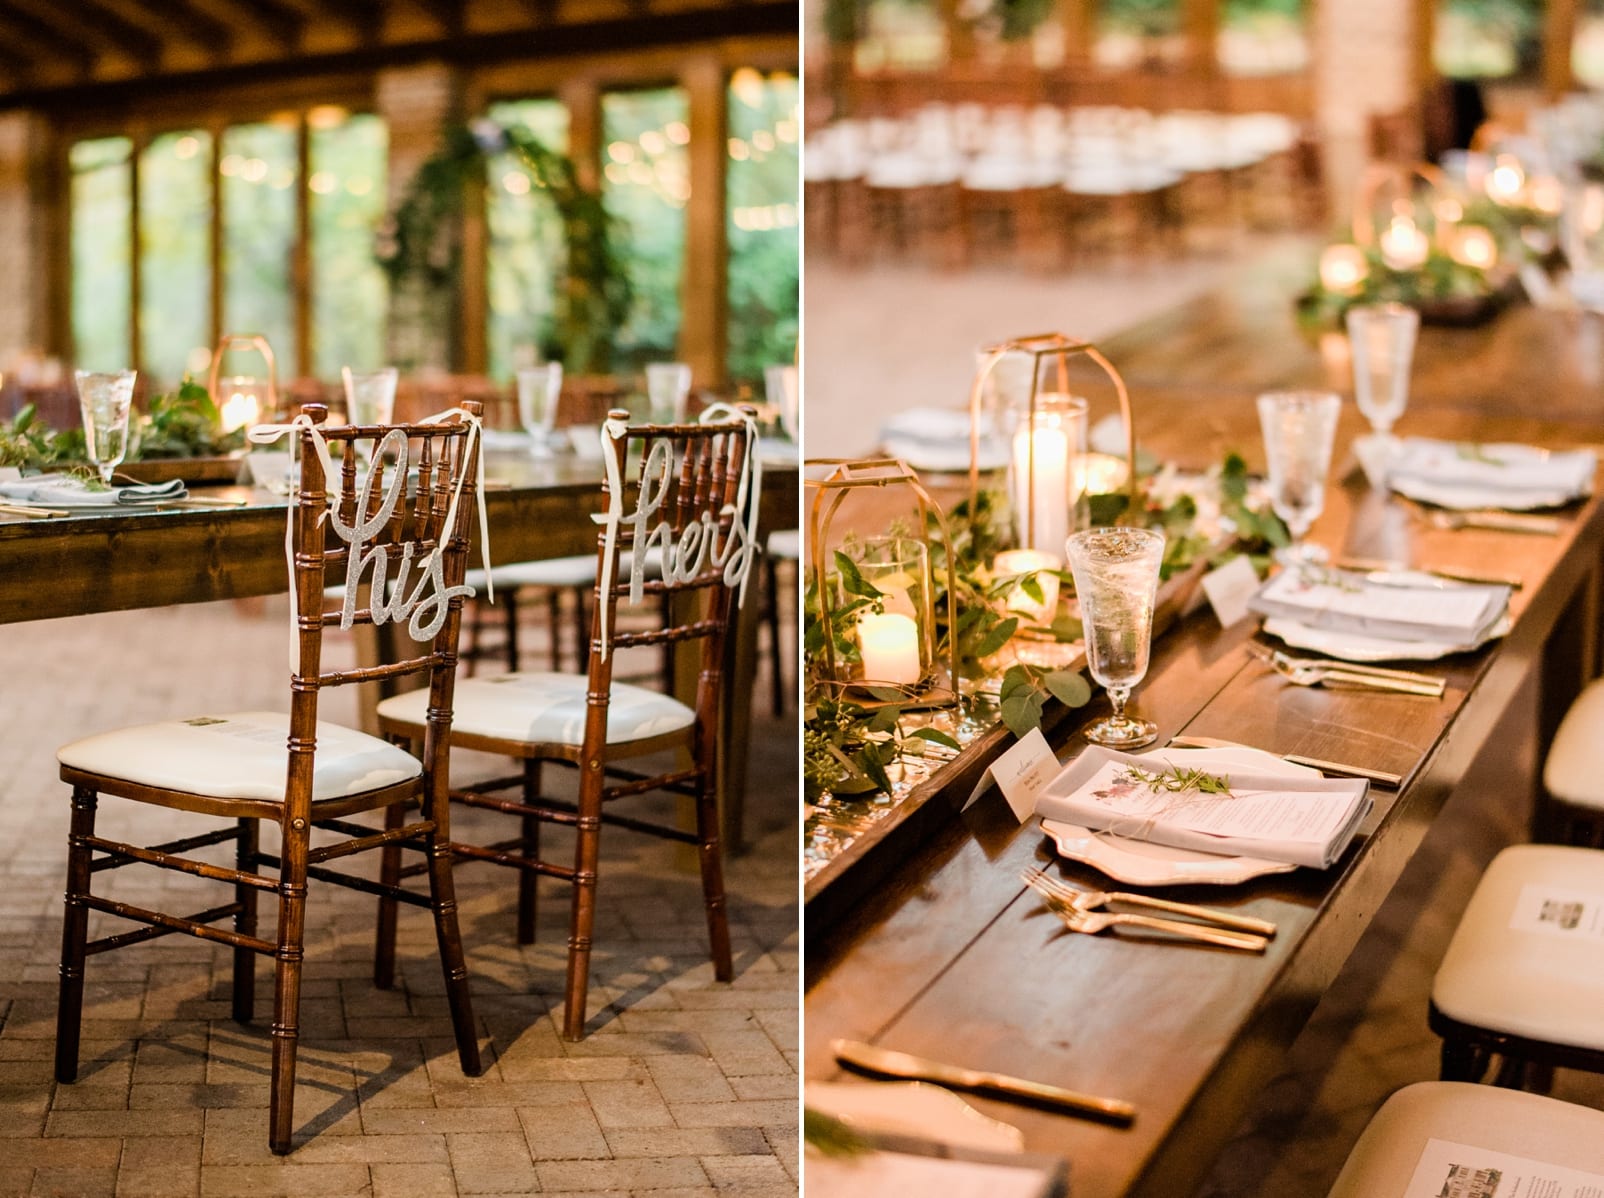 Sutherland Estate bride and groom sweetheart table seats with Mr. and Mrs. signs and place settings at a farmhouse style table photo